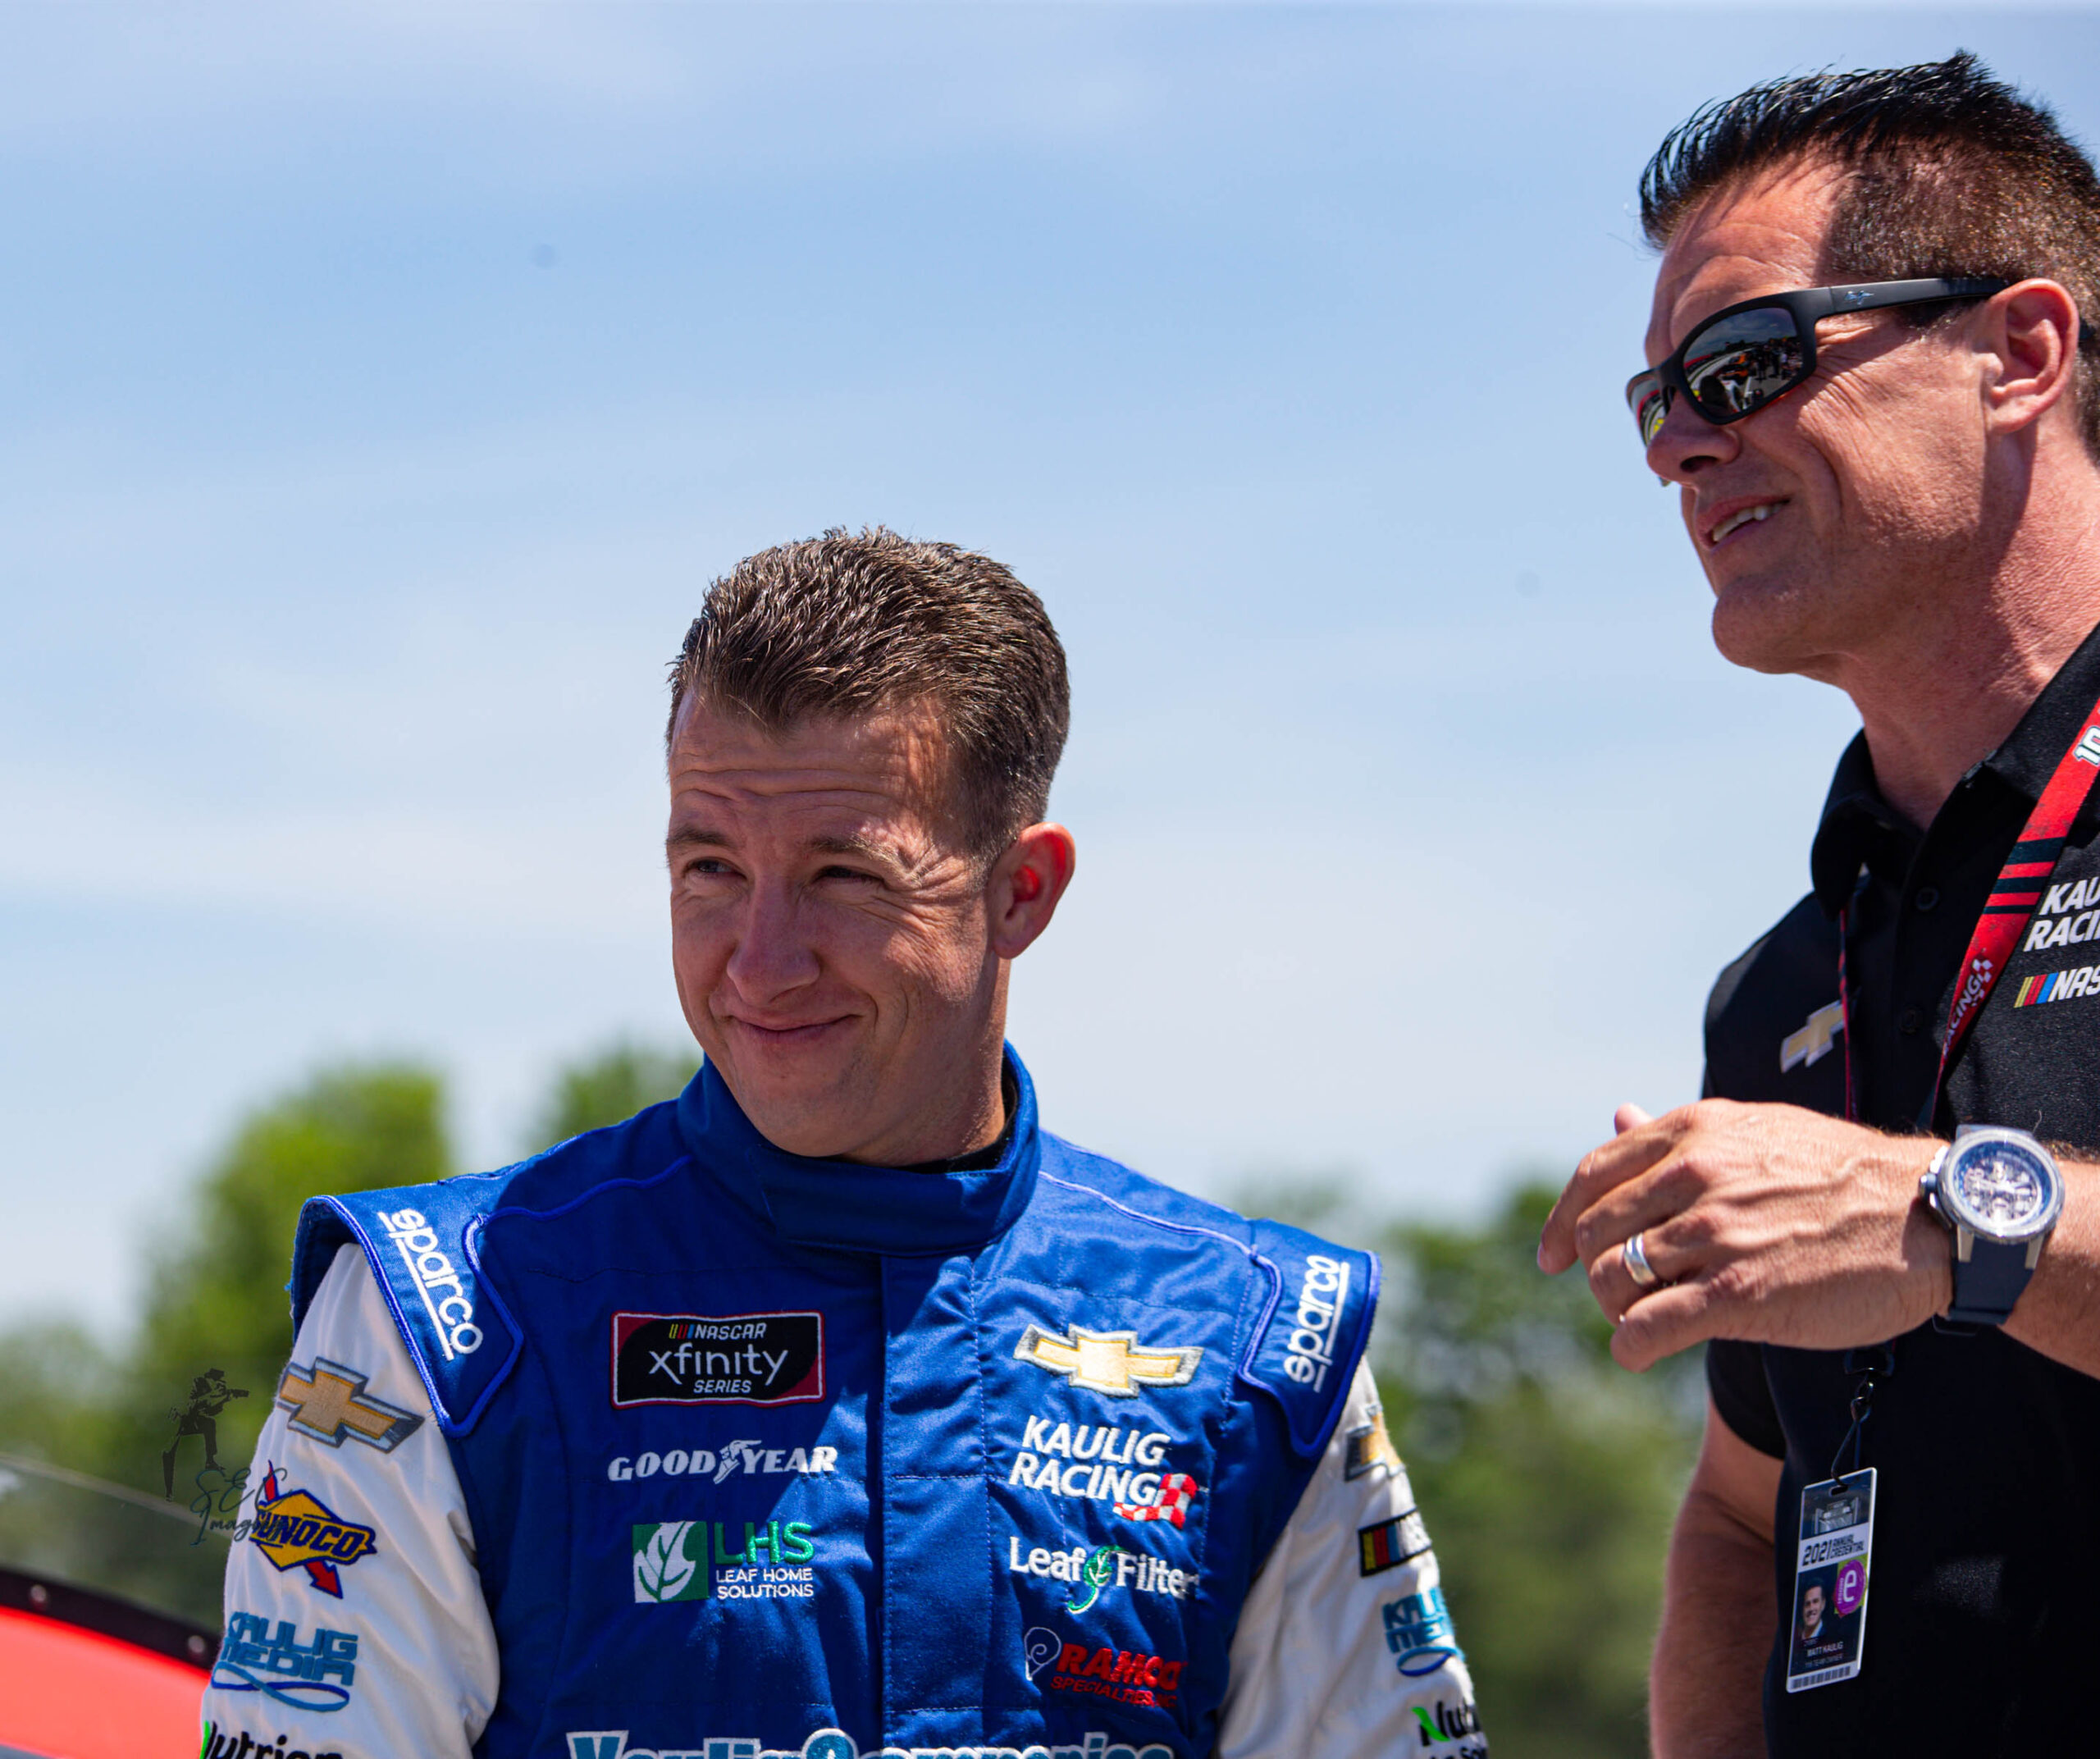 Without doubt, AJ Allmendinger and Matt Kaulig have their eyes on the XFINITY Series prize. (Photo: Stephen Conley/The Podium Finish)